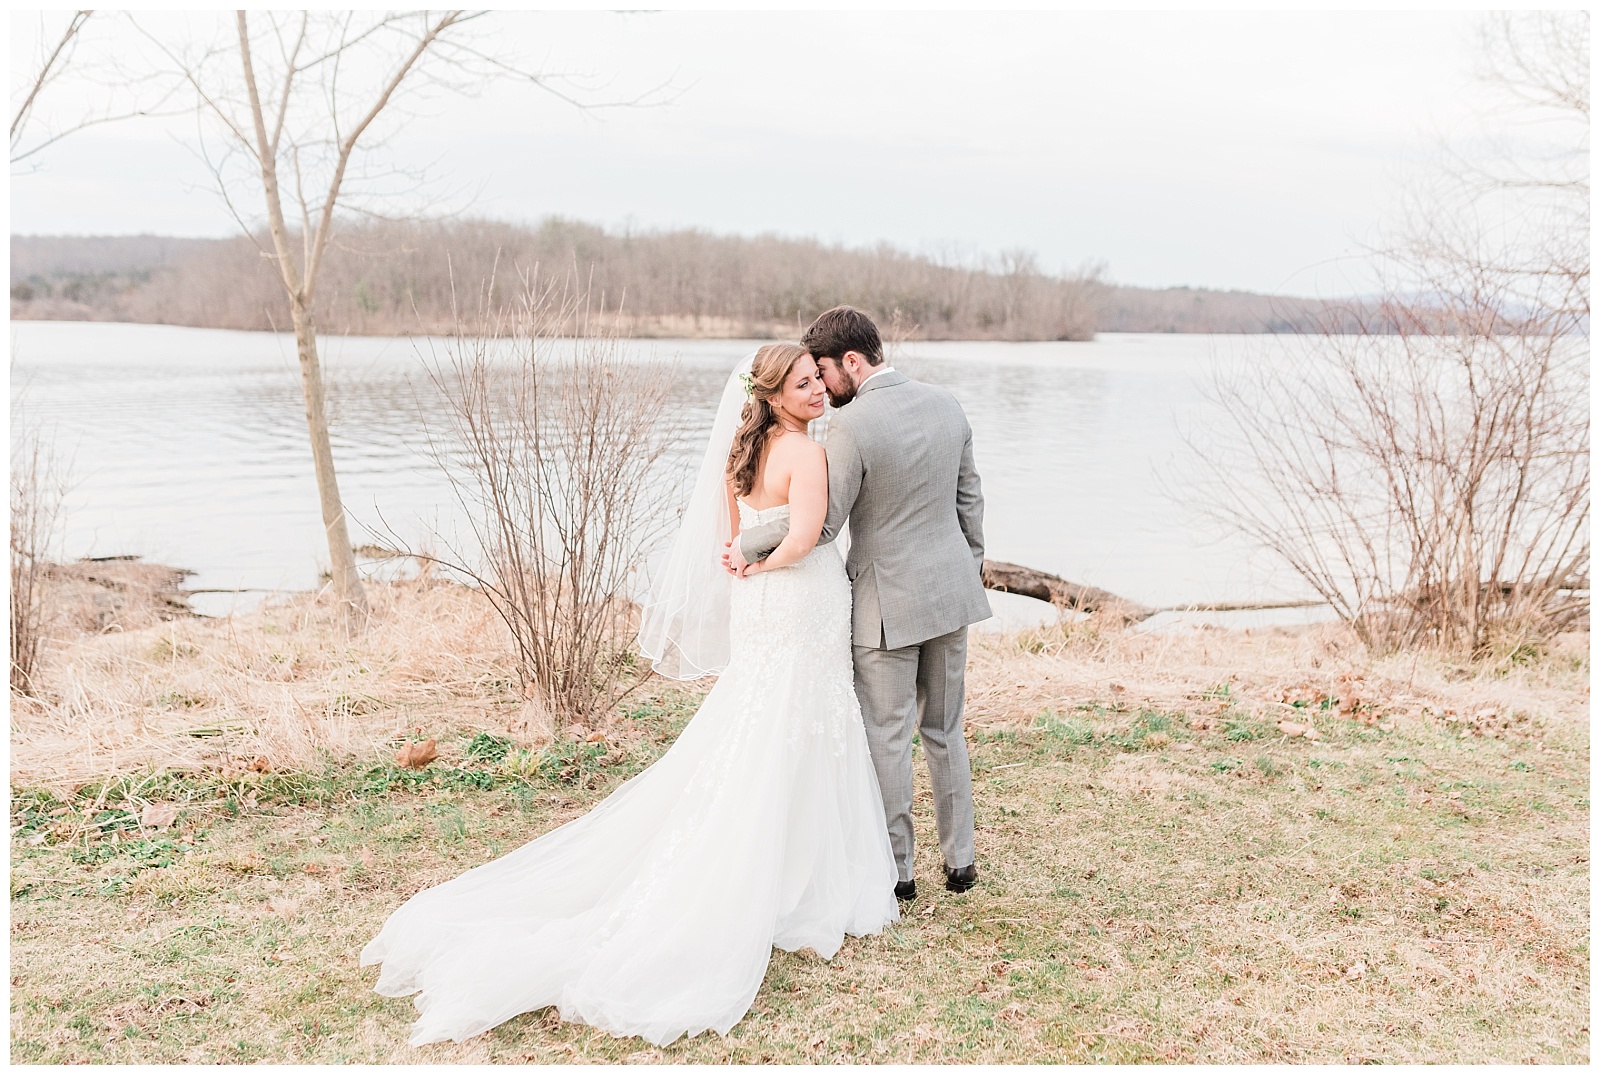 Groom kisses the bride on her cheek in front of the lake at the Lake House Inn wedding venue.